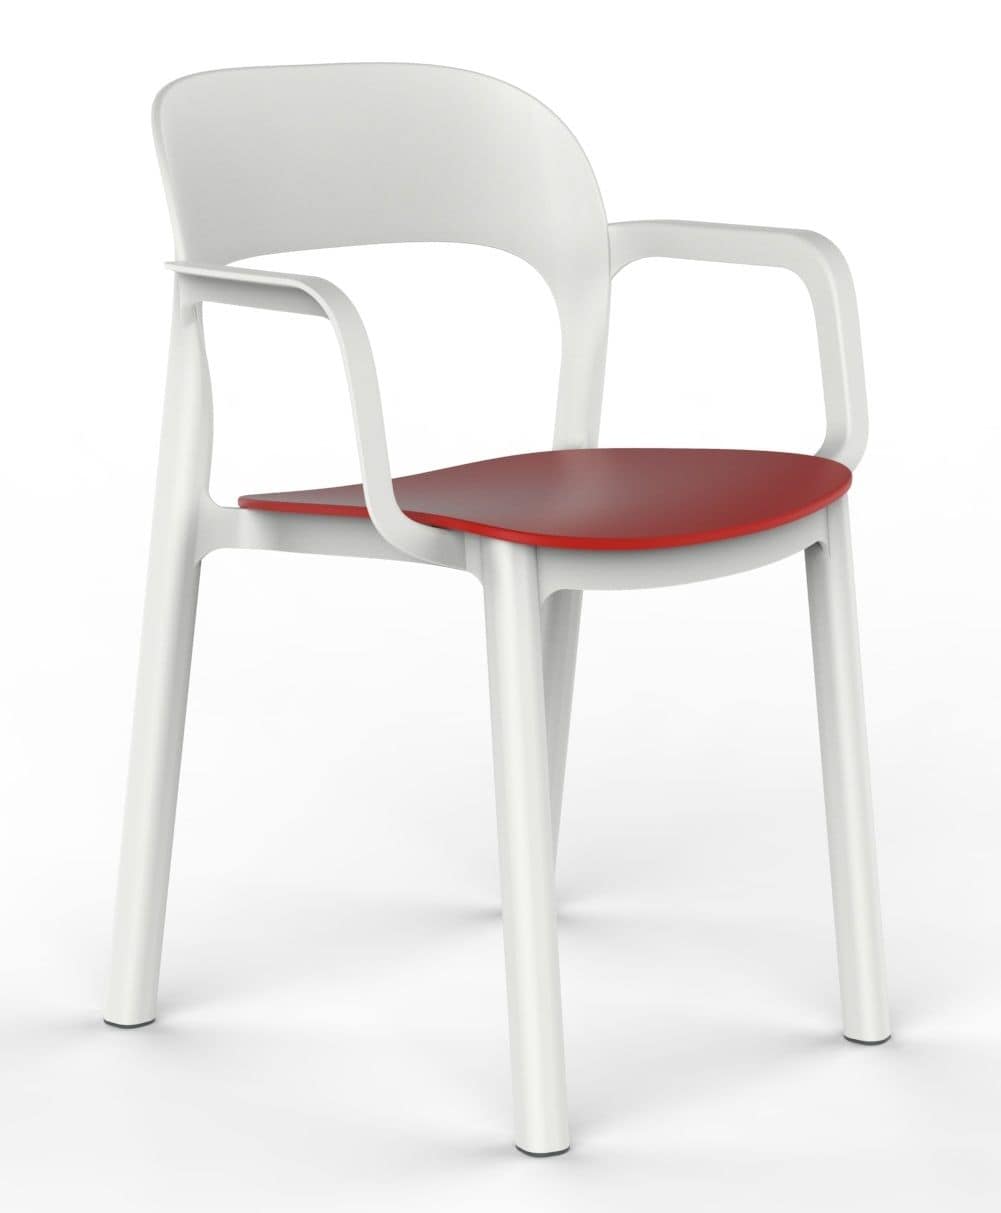 Opal - P, Chair with armrests, stackable, for outdoors